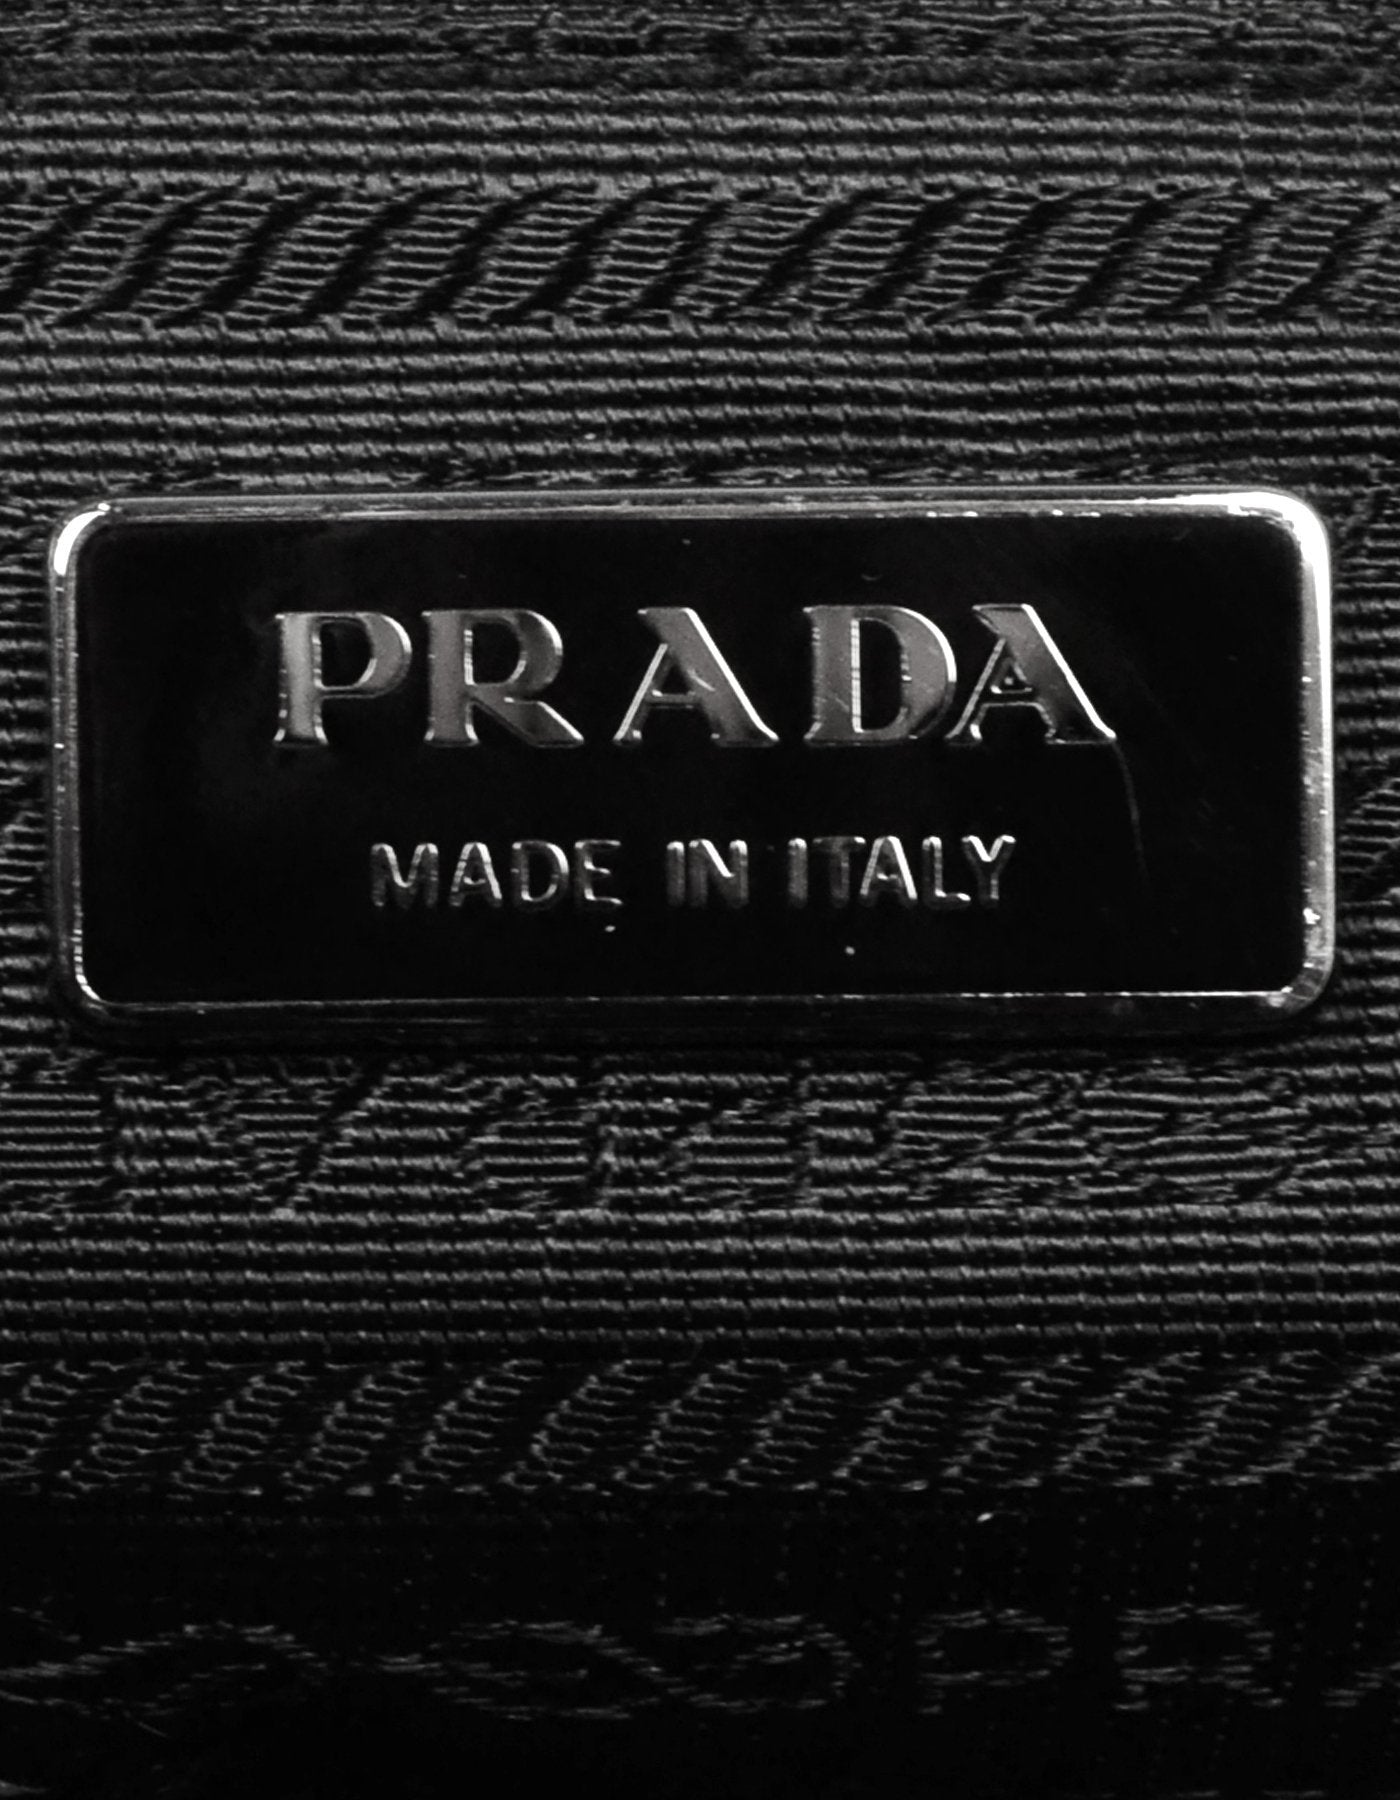 Prada Black Tessuto Nylon Soft Calf Leather Adjustable Backpack 1BZ677 at_Queen_Bee_of_Beverly_Hills